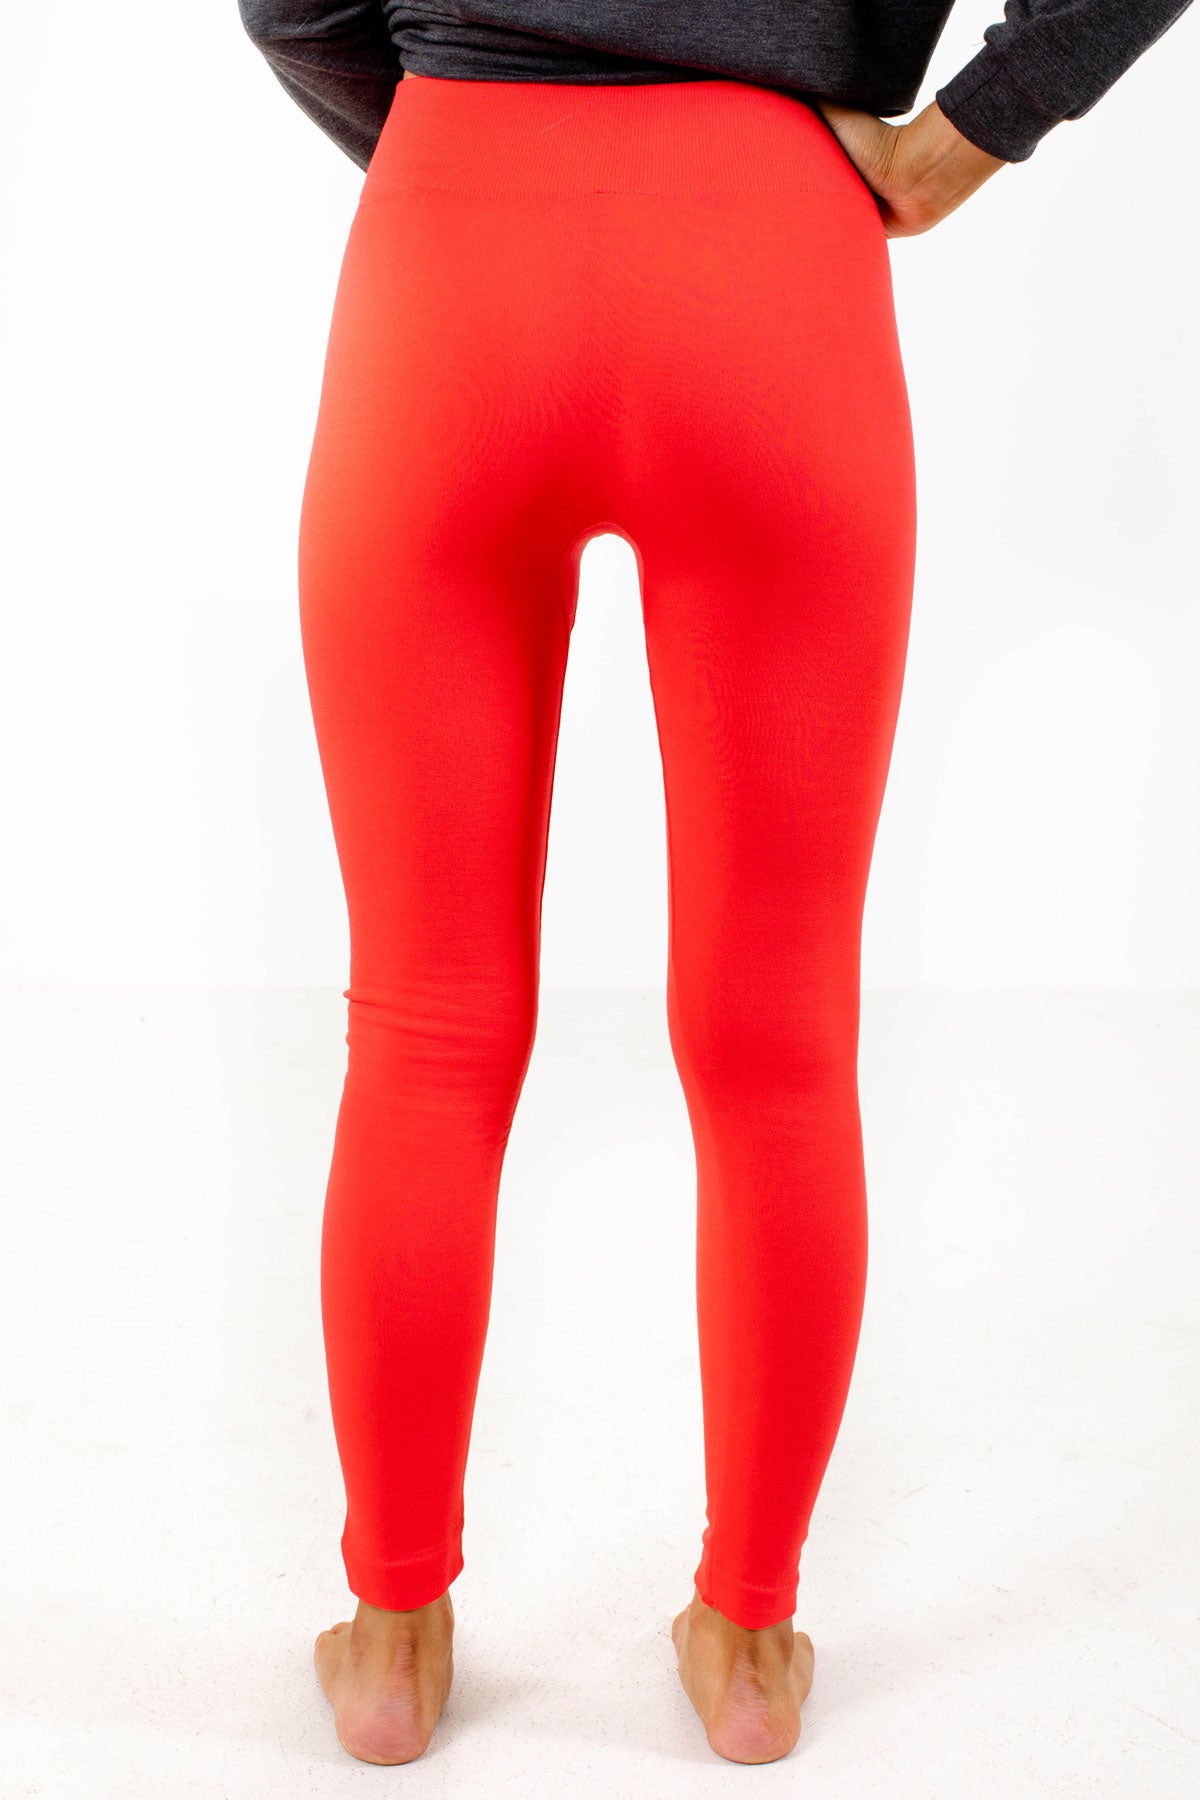 Check It Out Coral Leggings  Boutique Clothing for Women